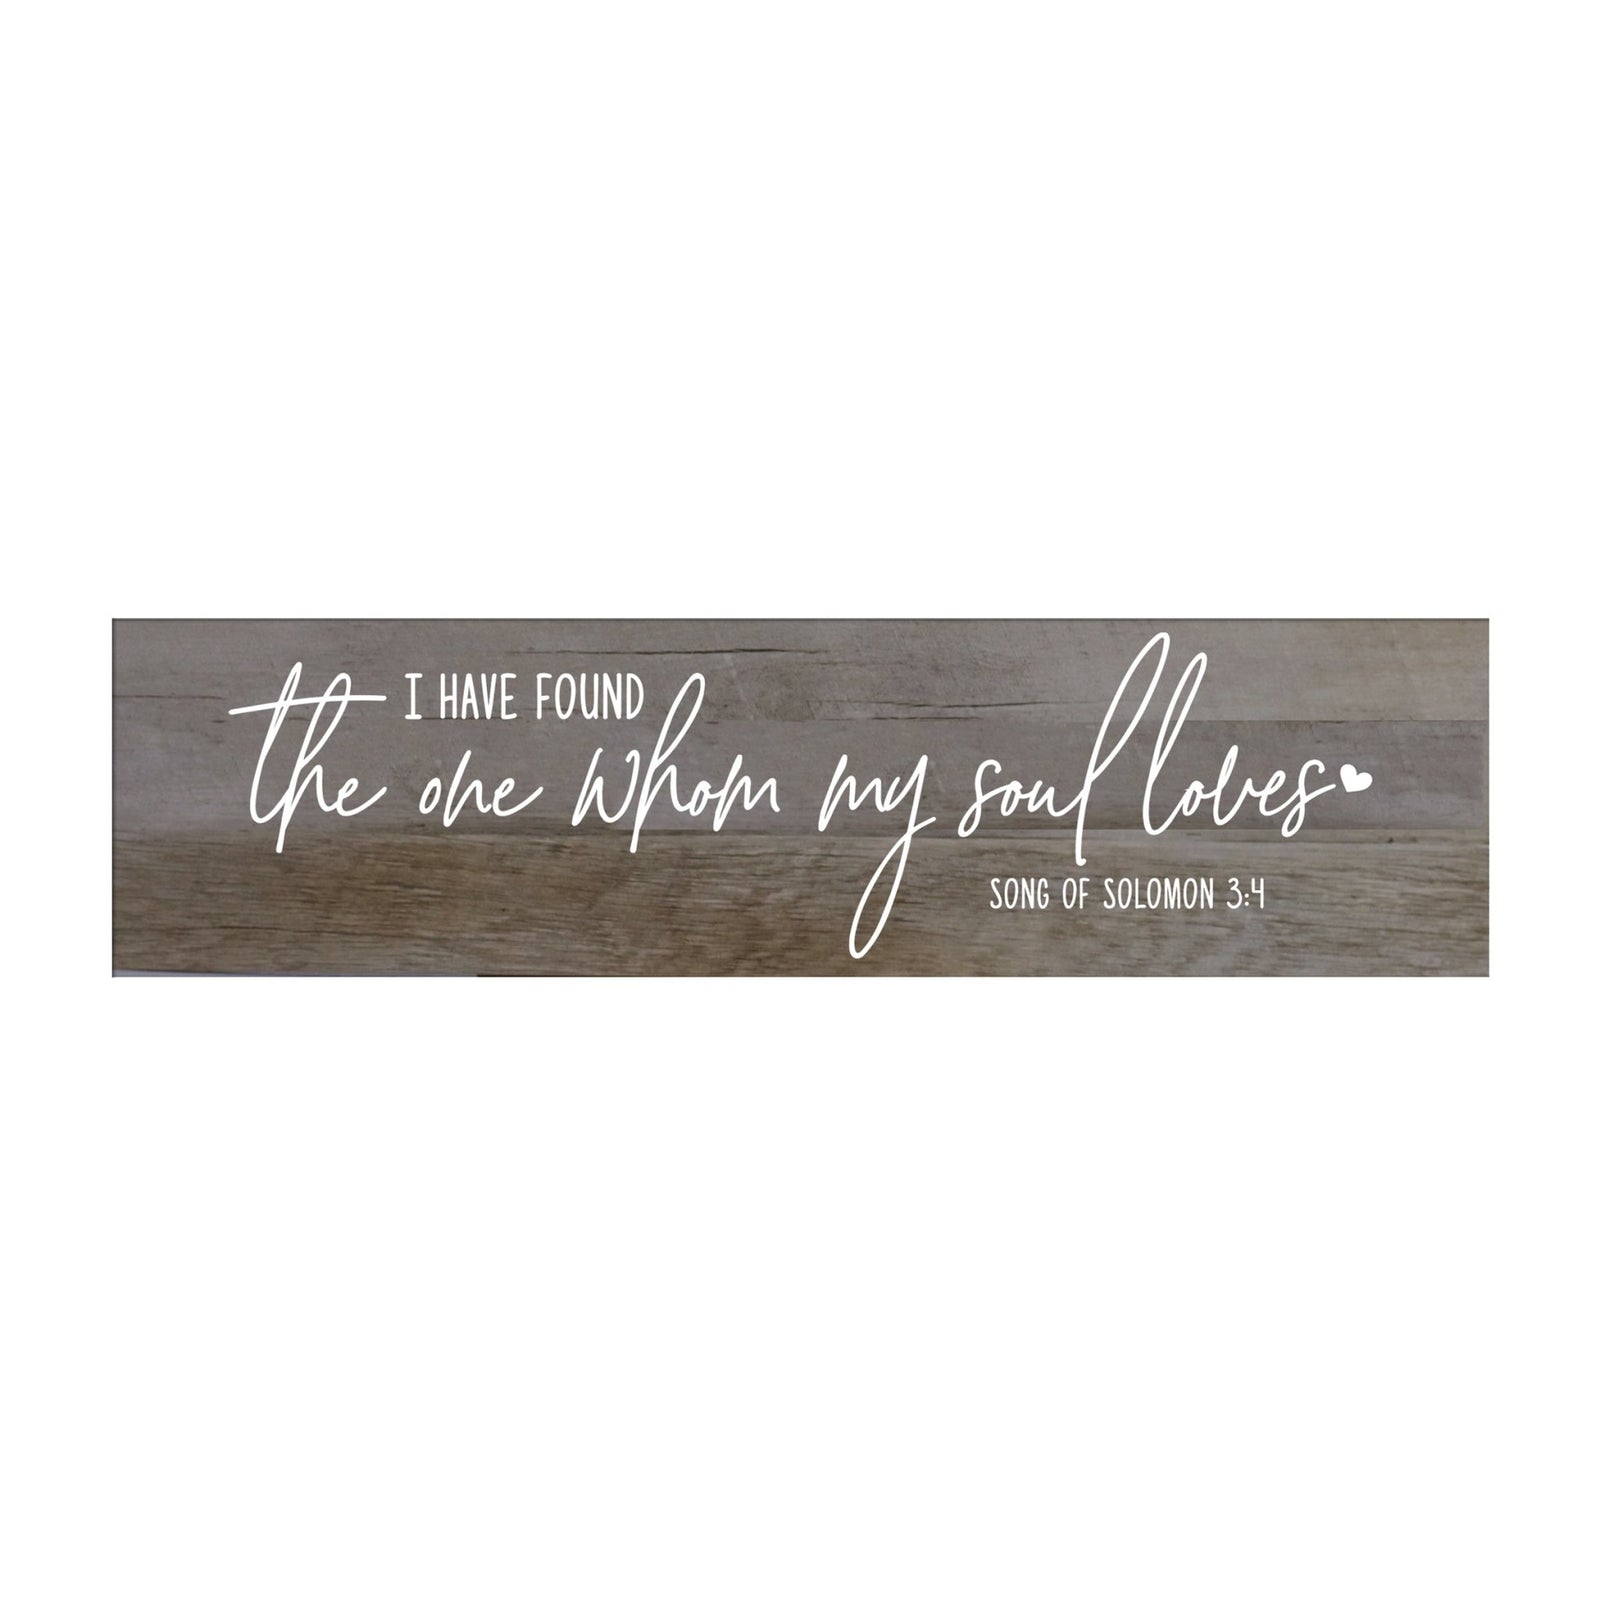 Inspirational Everyday Home and Family Wooden Wall Art Hanging Plaque 10 x 40 – I Have Found The One - LifeSong Milestones